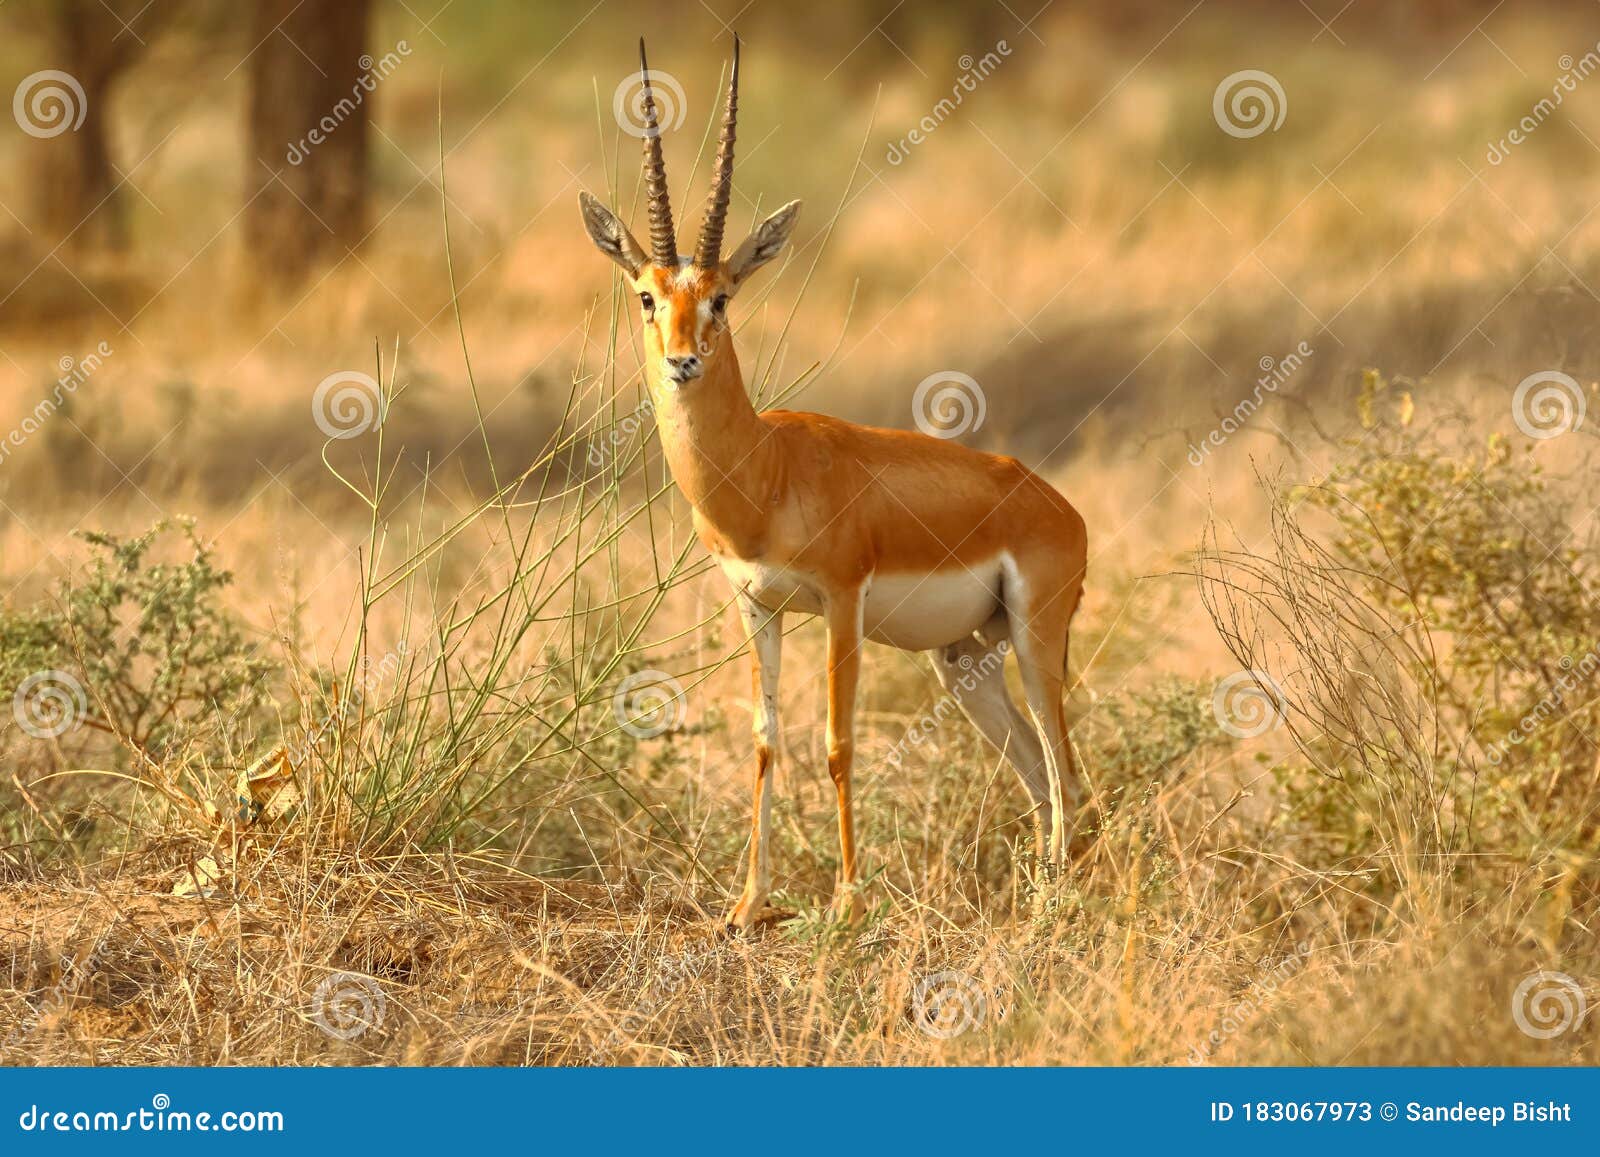 An Indian Gazelle Antelope Also Called Chinkara with Large Long Pointed  Horns Standing Alone Under the Evening Sun and Amidst Dry Stock Image -  Image of animal, antelope: 183067973